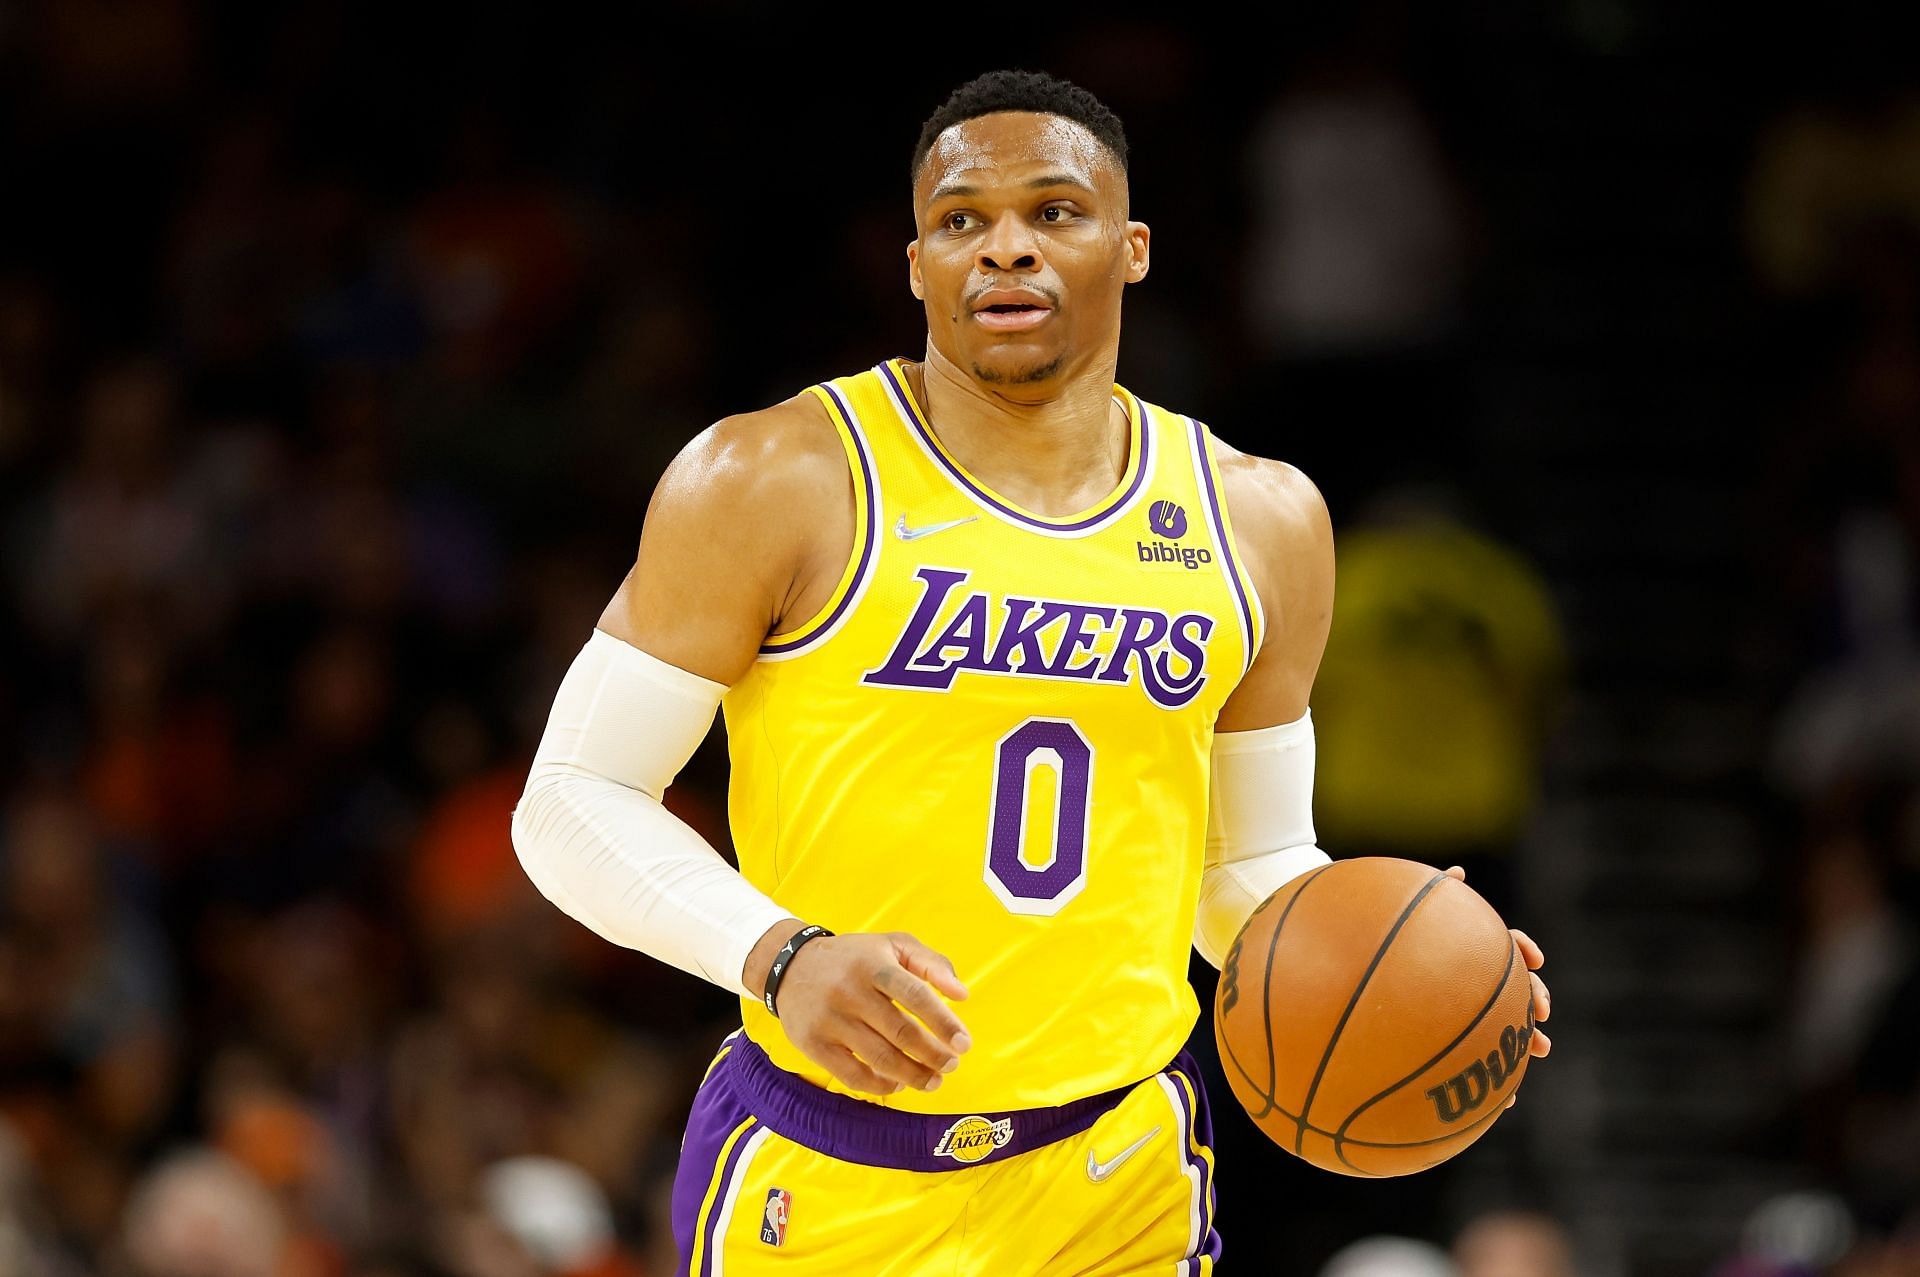 Los Angeles Lakers v Phoenix Suns; Russell Westbrook handles the ball